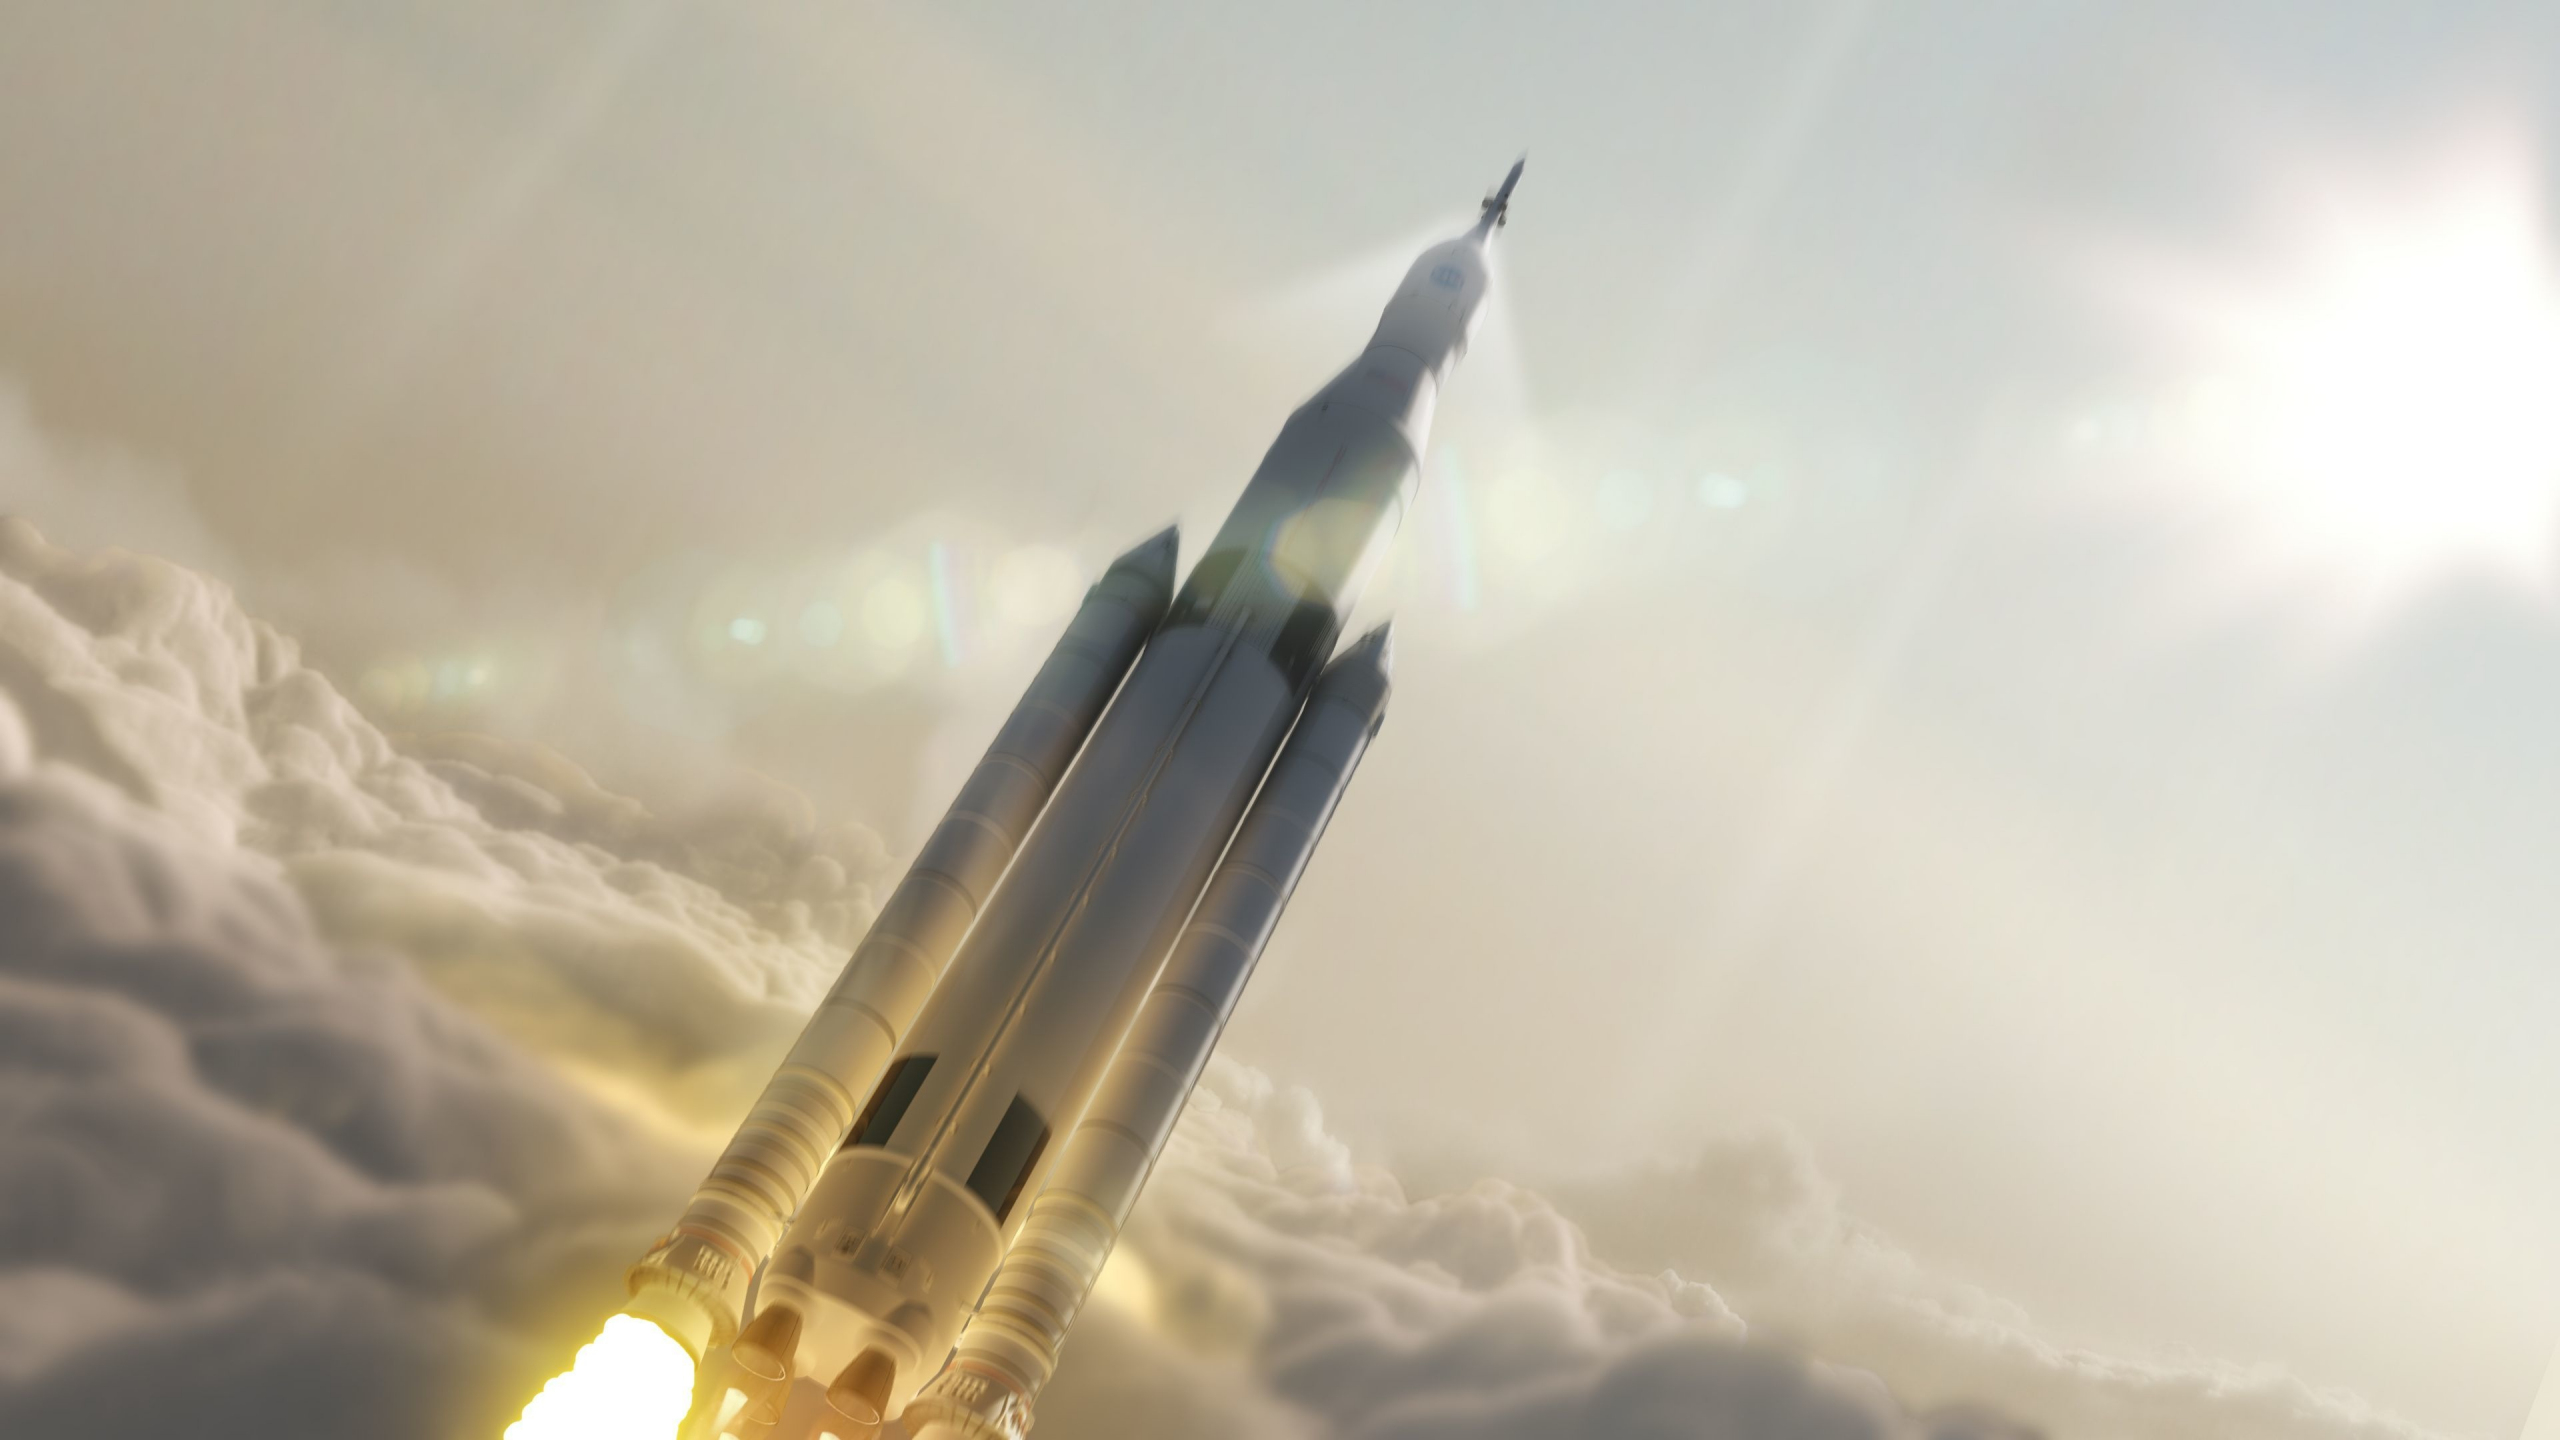 2560x1440 Download falcon heavy, sky, clouds, rocket, spacex wallpaper, dual wide 16:9 hd image, background, 2964